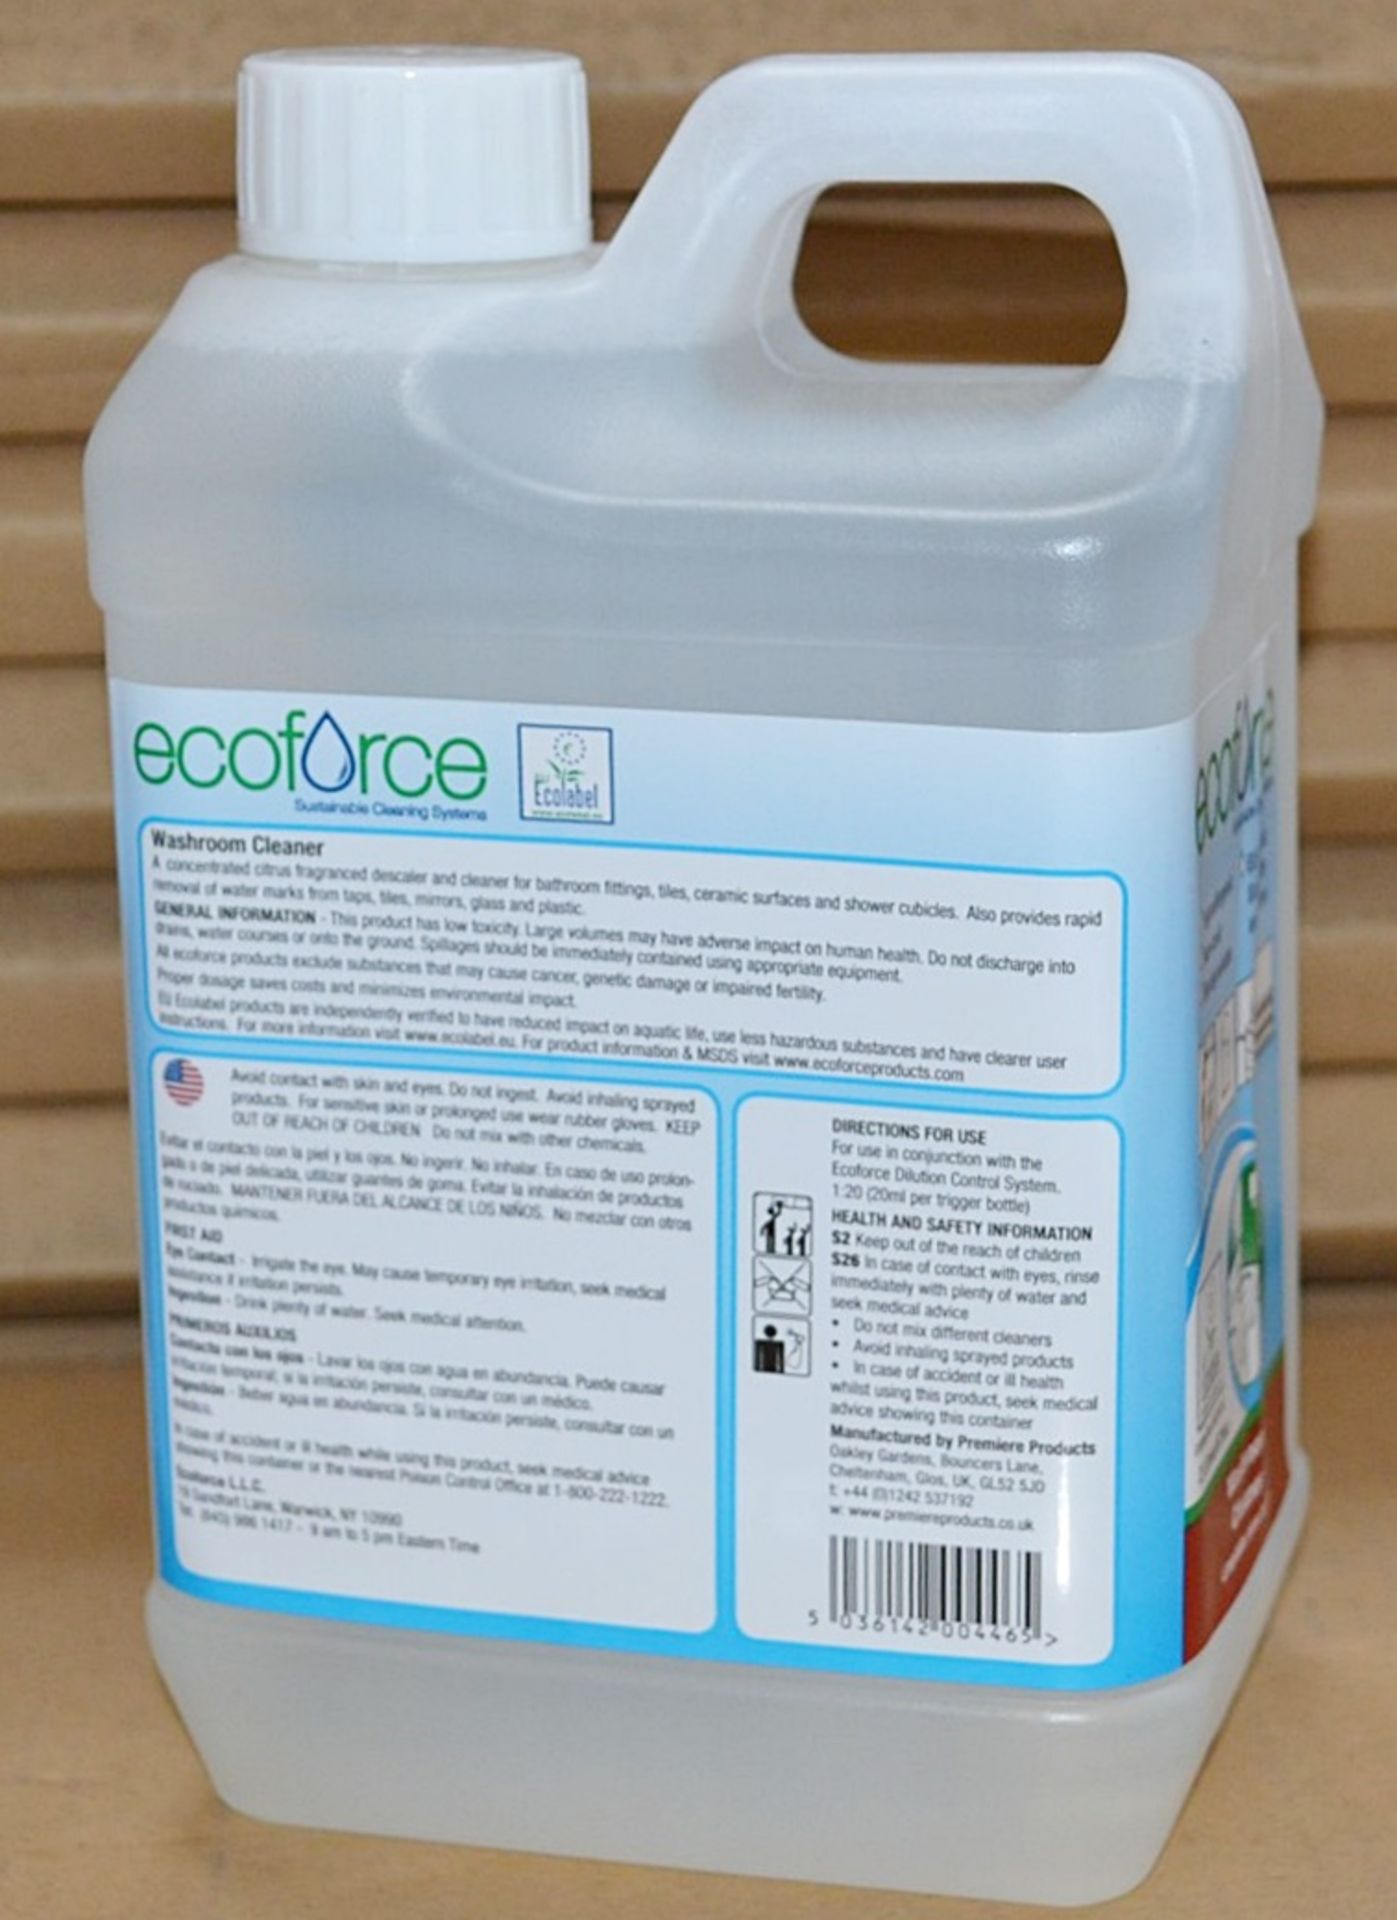 4 x 2 Litre Ecoforce Concentrated Washroom Cleaner - New & Boxed Stock - CL083 - Ref: 11605 - - Image 4 of 8